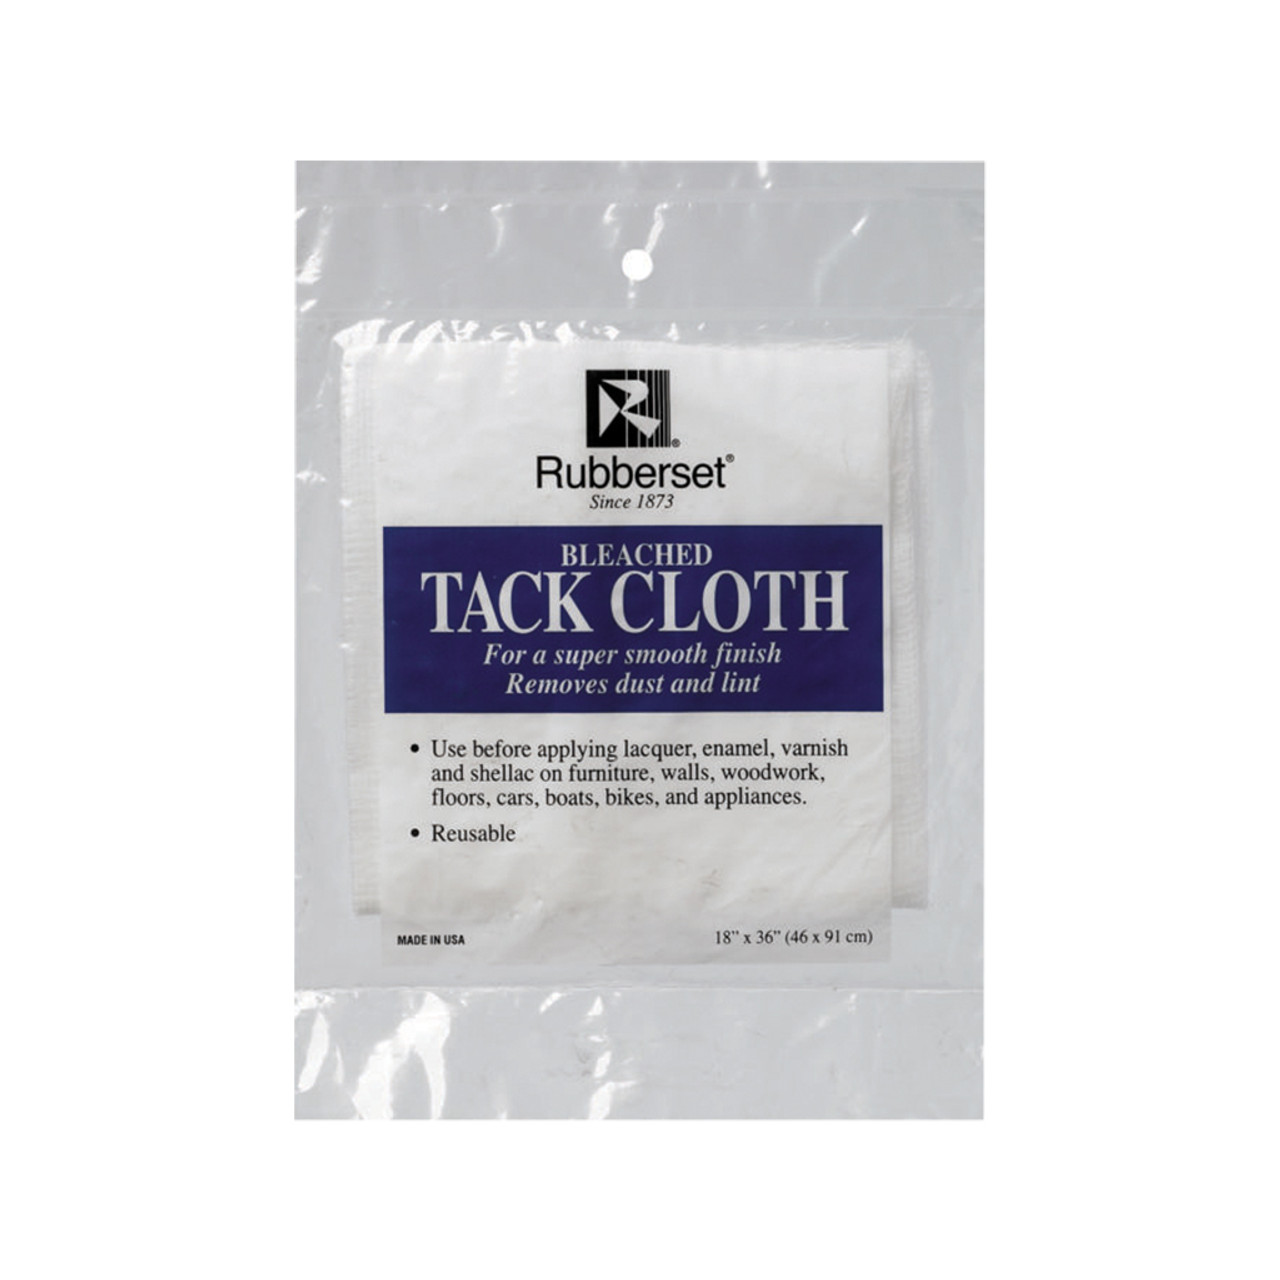 Rubberset Tack Cloth, 18 x 36 - Midwest Technology Products